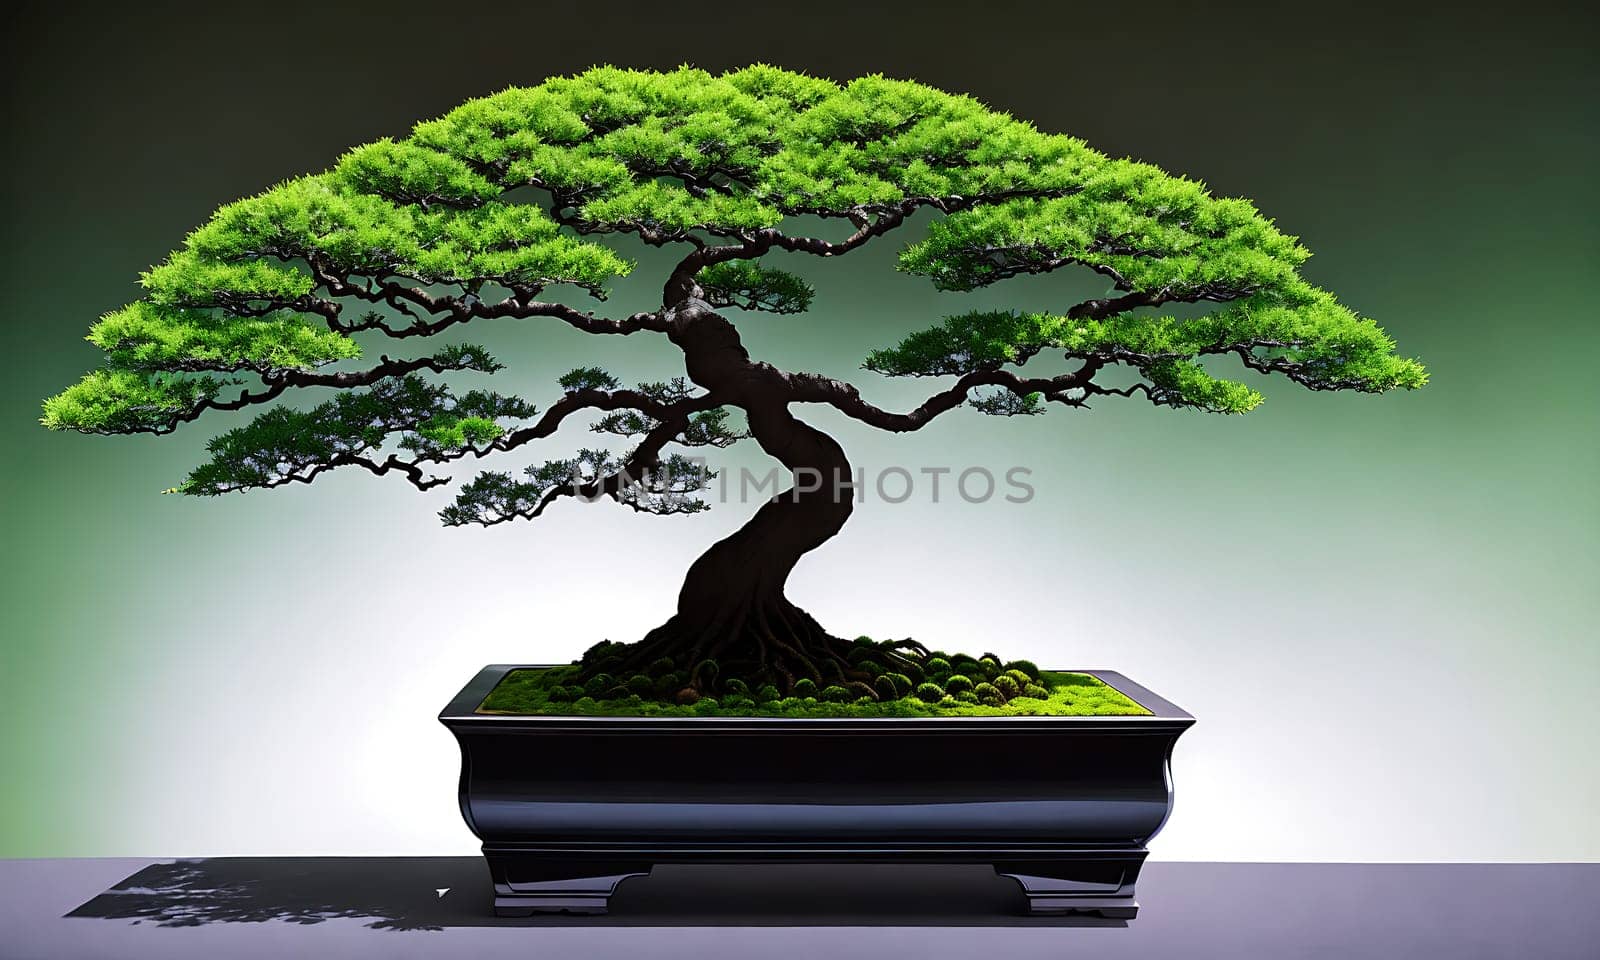 The image shows a small Japanese bonsai tree growing in a black pot on a wooden table.